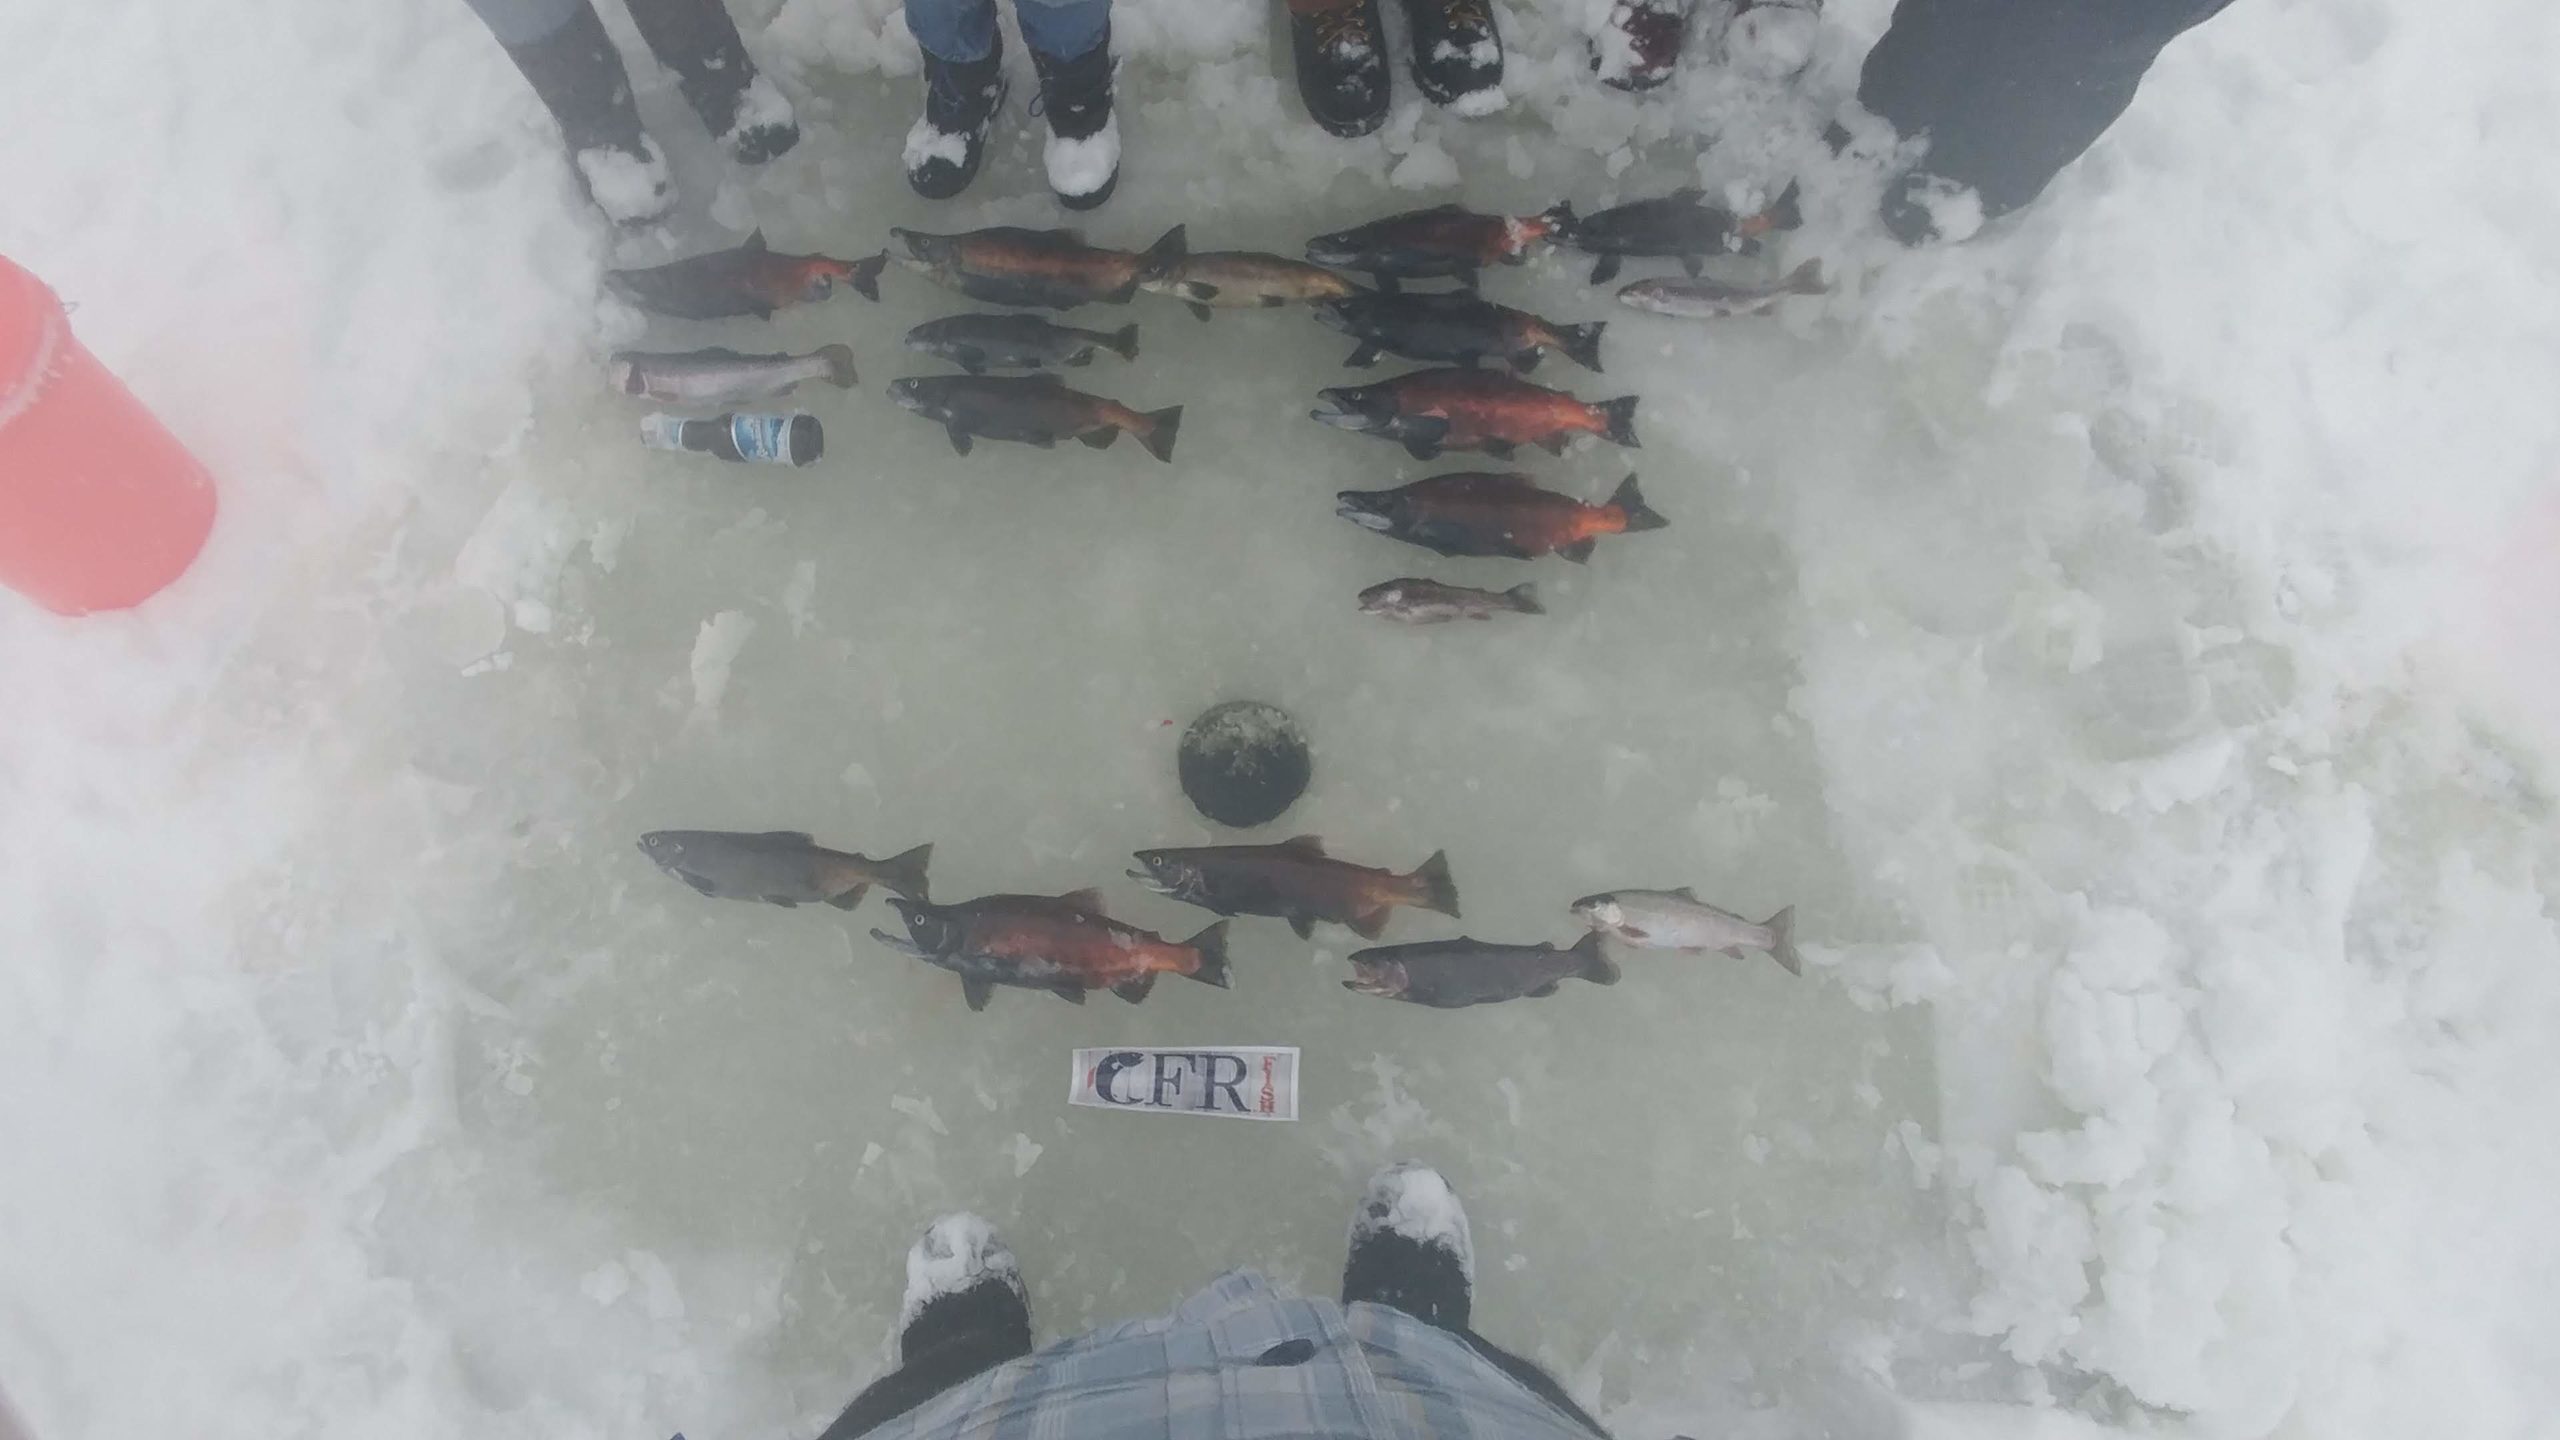 large number of trout and kokanee laying on the ice next to a CFR bumper sticker